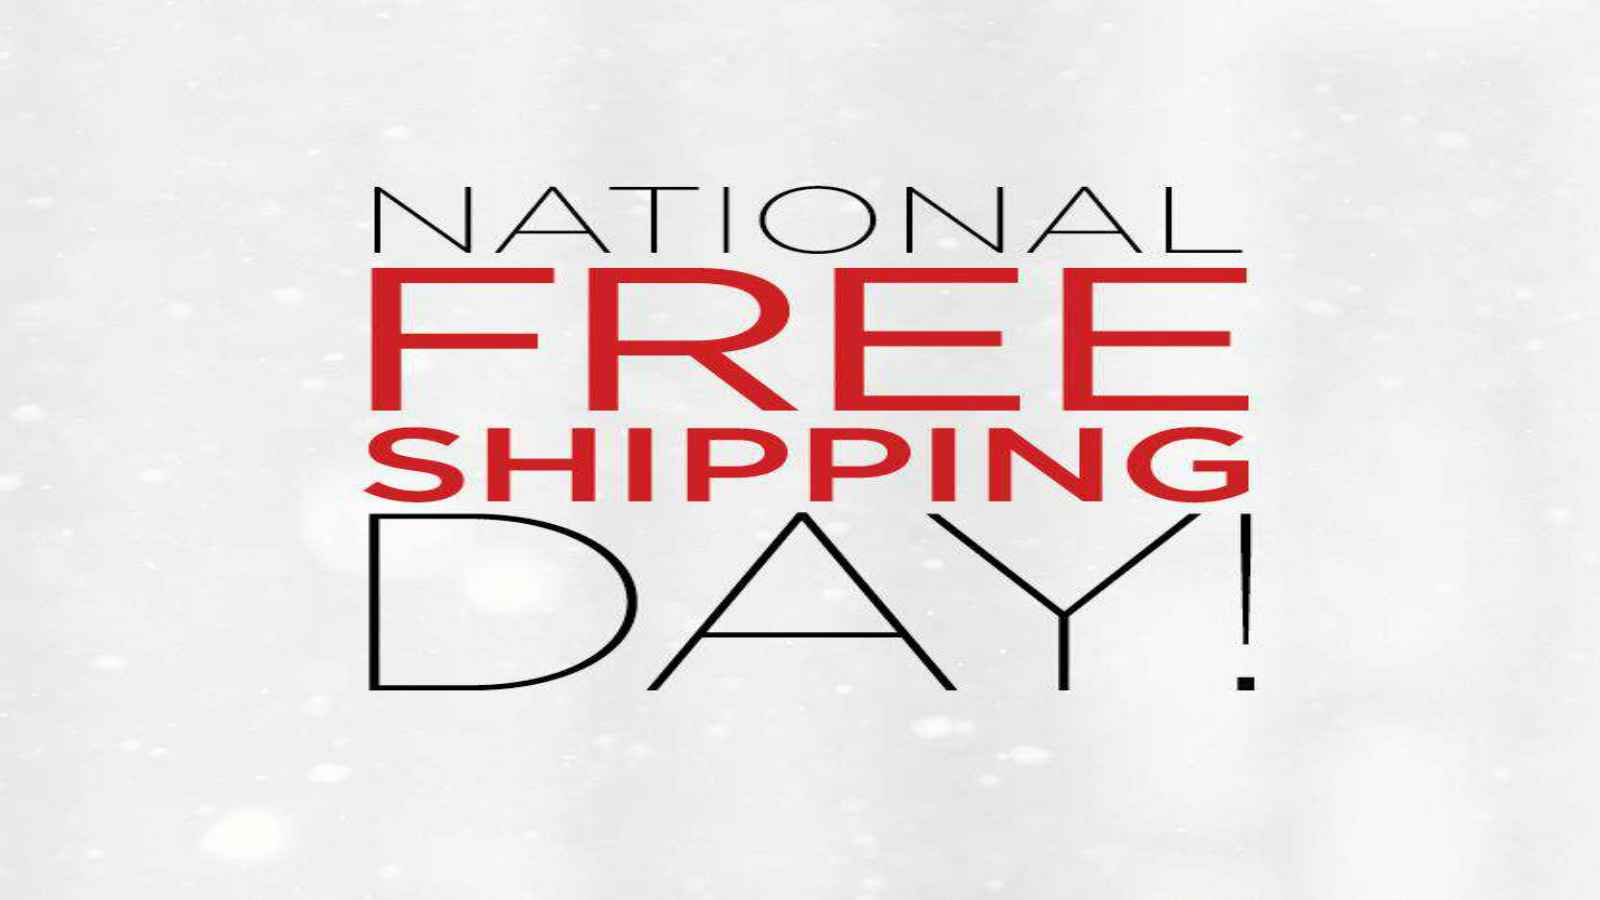 National Free Shipping Day 2023: Date, History and What Stores Offer Free Shipping on National Free Shipping Day